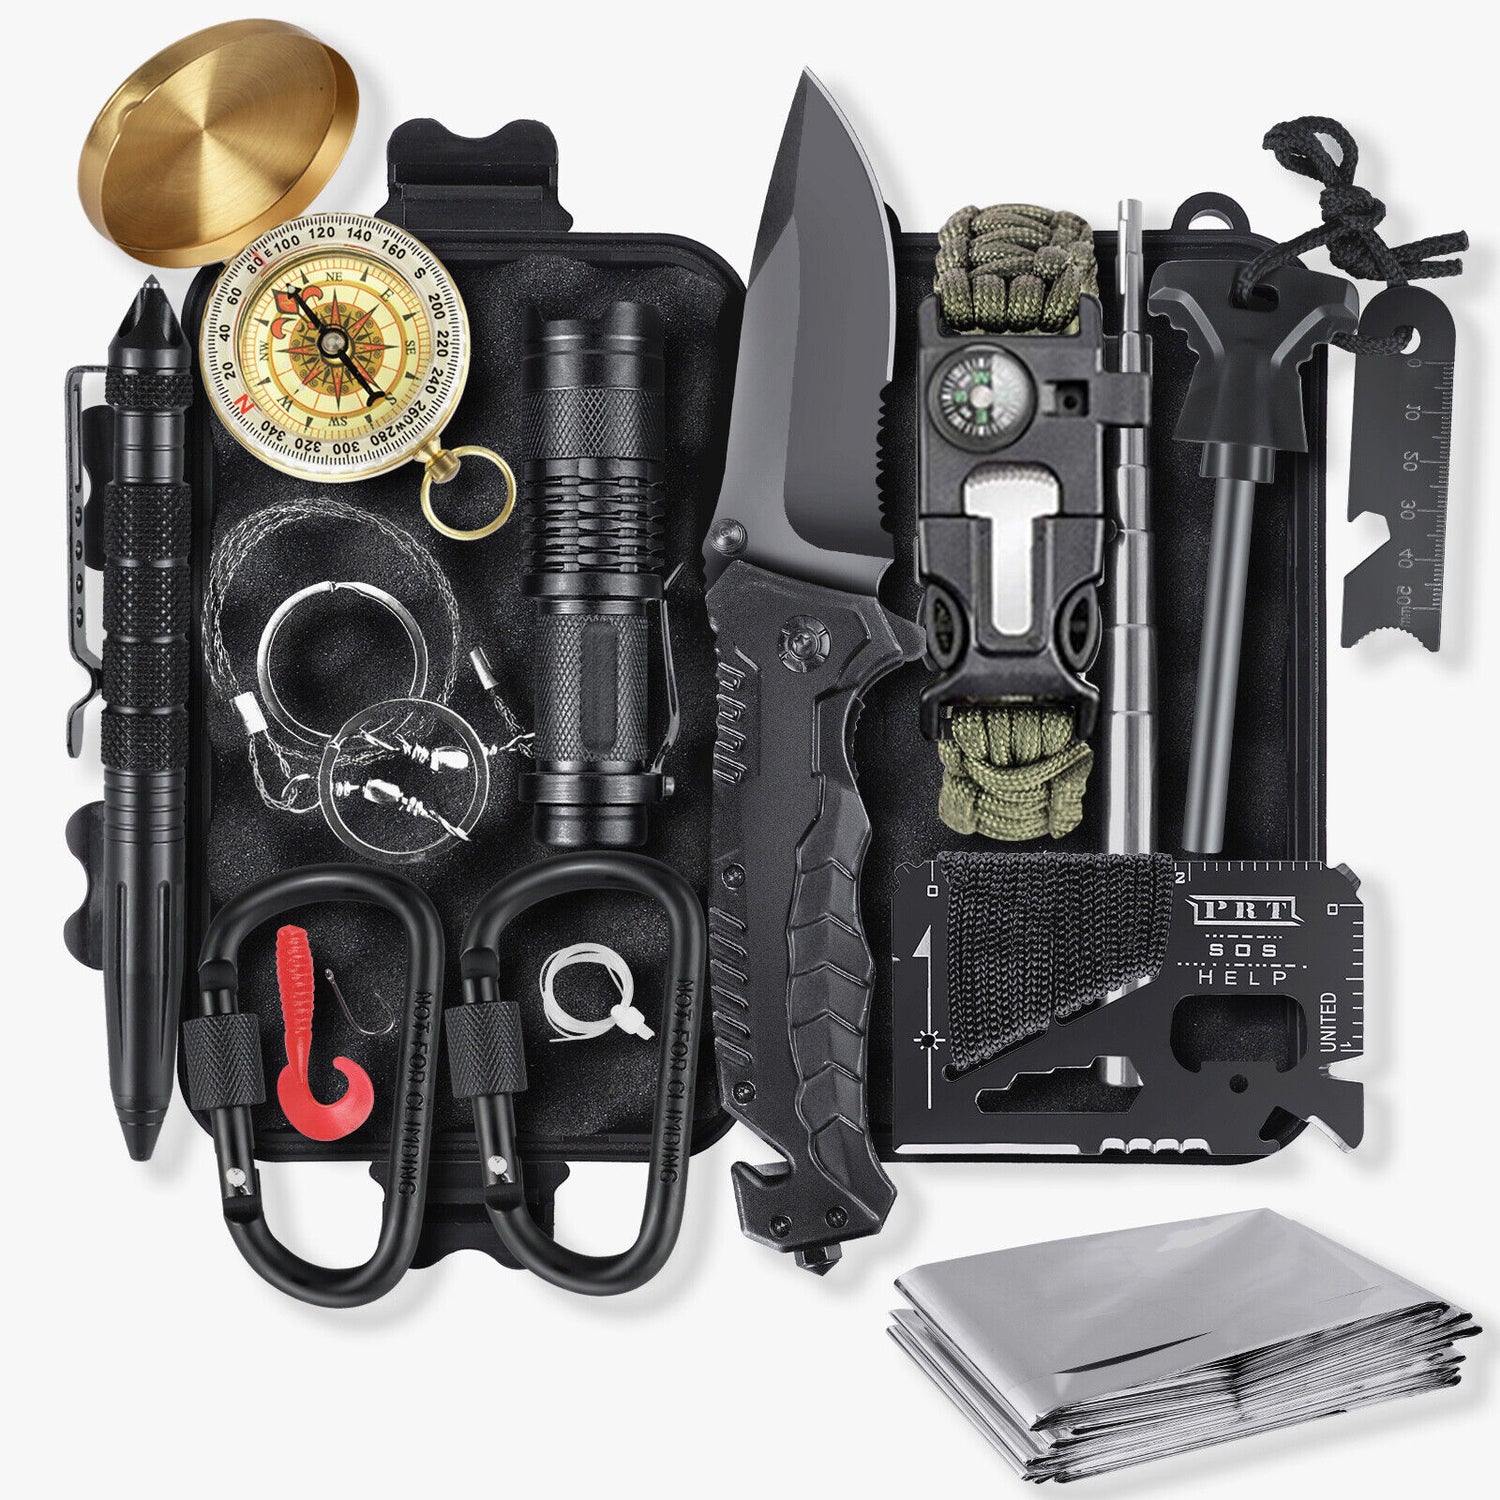 14in1 Outdoor Emergency Survival Gear Kit Camping Hiking Survival Gear Tools Kit Survival Gear And Equipment, Outdoor Fishing Hunting Camping Accessories Lion-Tree